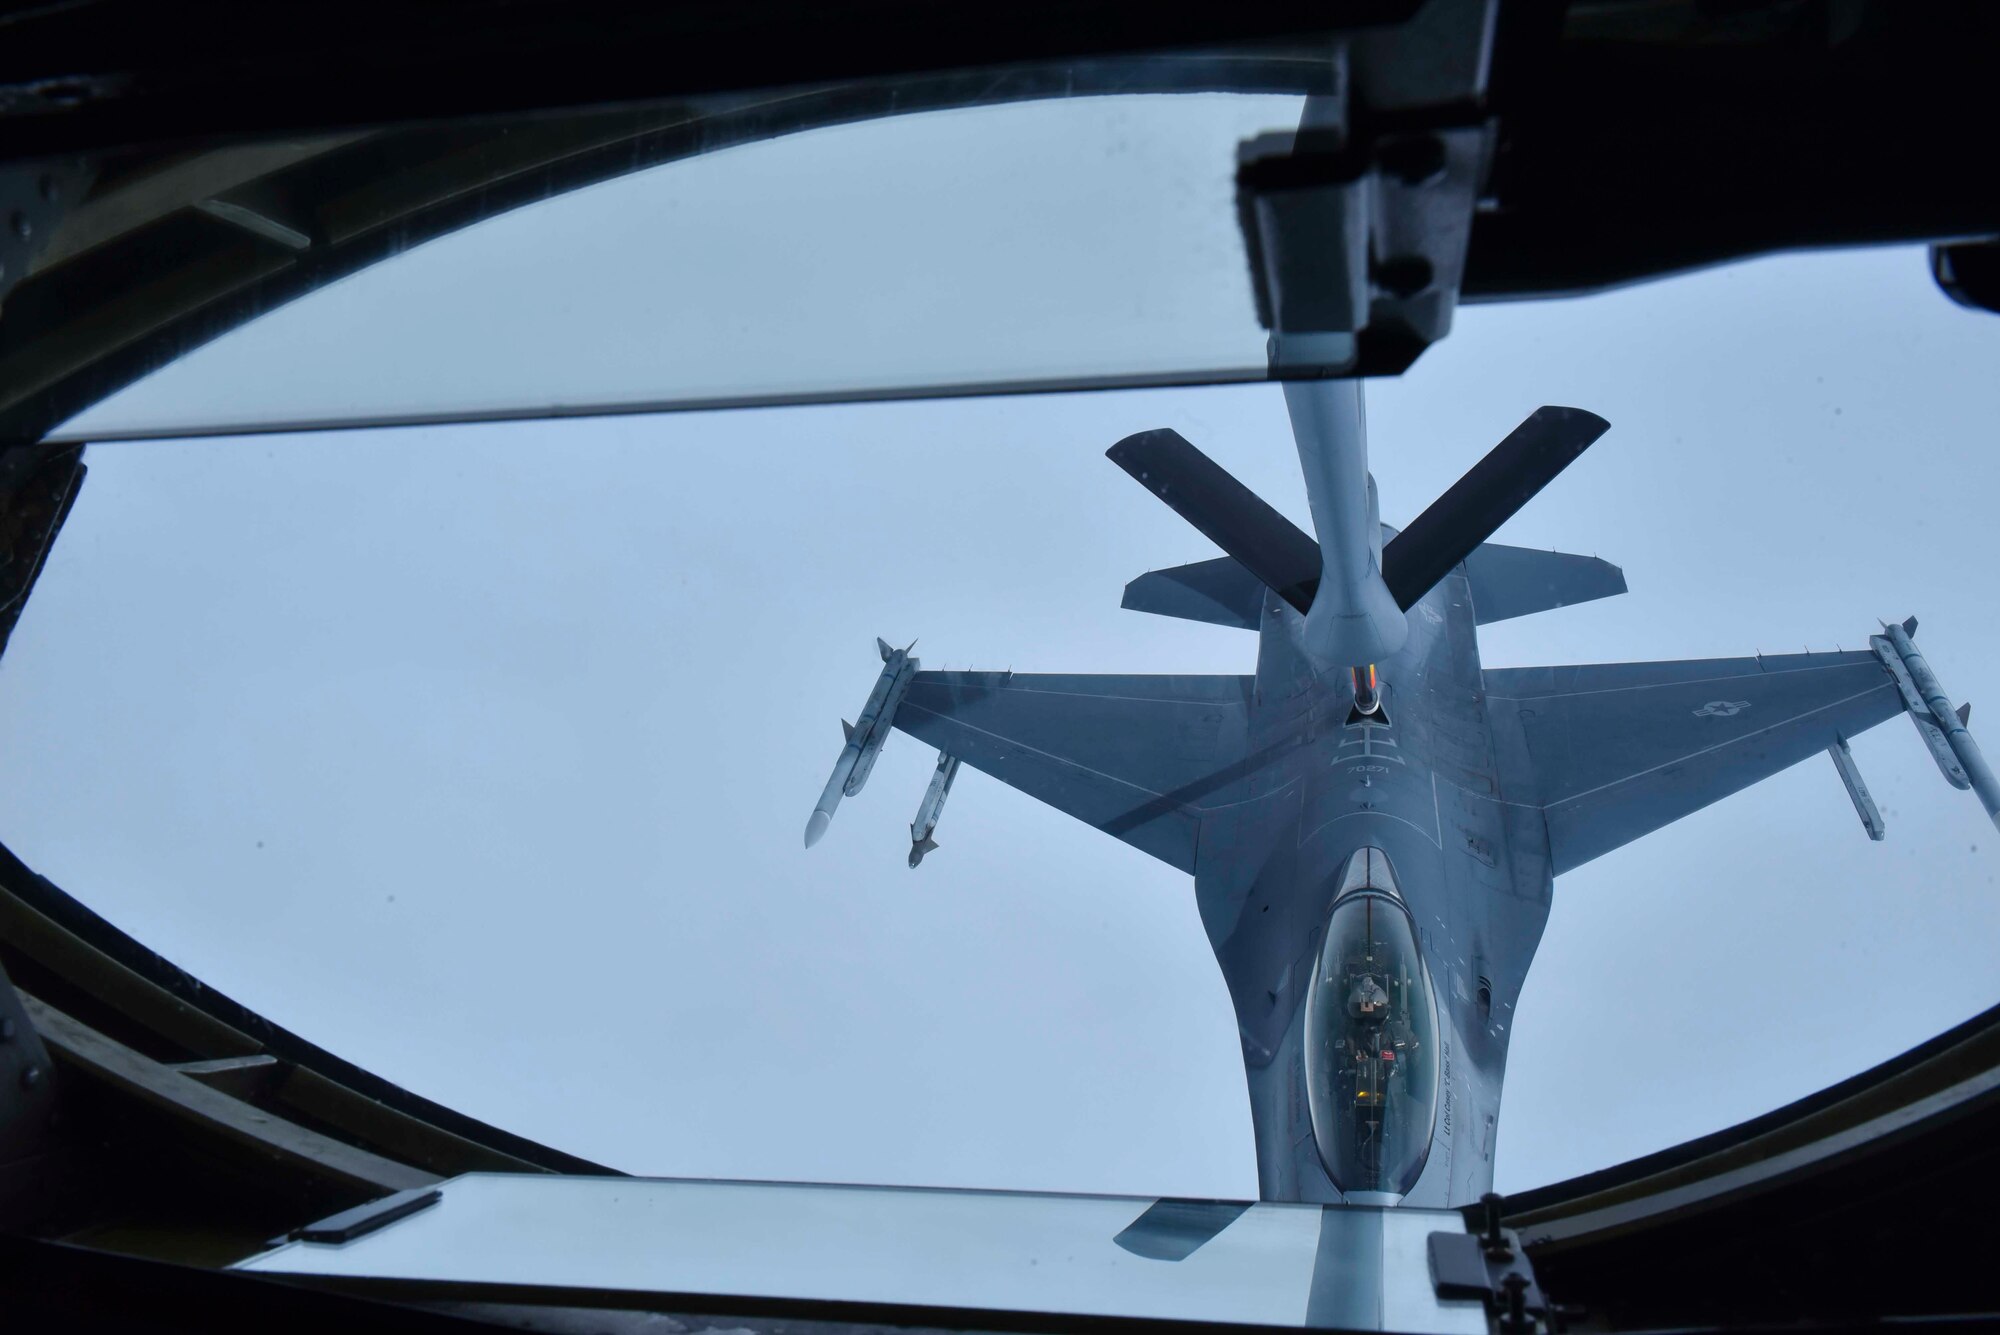 A Fairchild Air Force Base KC-135 Stratotanker refuels a Maxwell Air Force Base F-16 Fighting Falcon from the Red Tail Squadron of the 187th Fighter Wing from while flying over Alabama, February 18, 2020. The Red Tail Squadron was home to the Tuskegee Airmen, the first all-black squadron in the U.S. military. (U.S. Air Force photo by Airman 1st Class Kiaundra Miller)